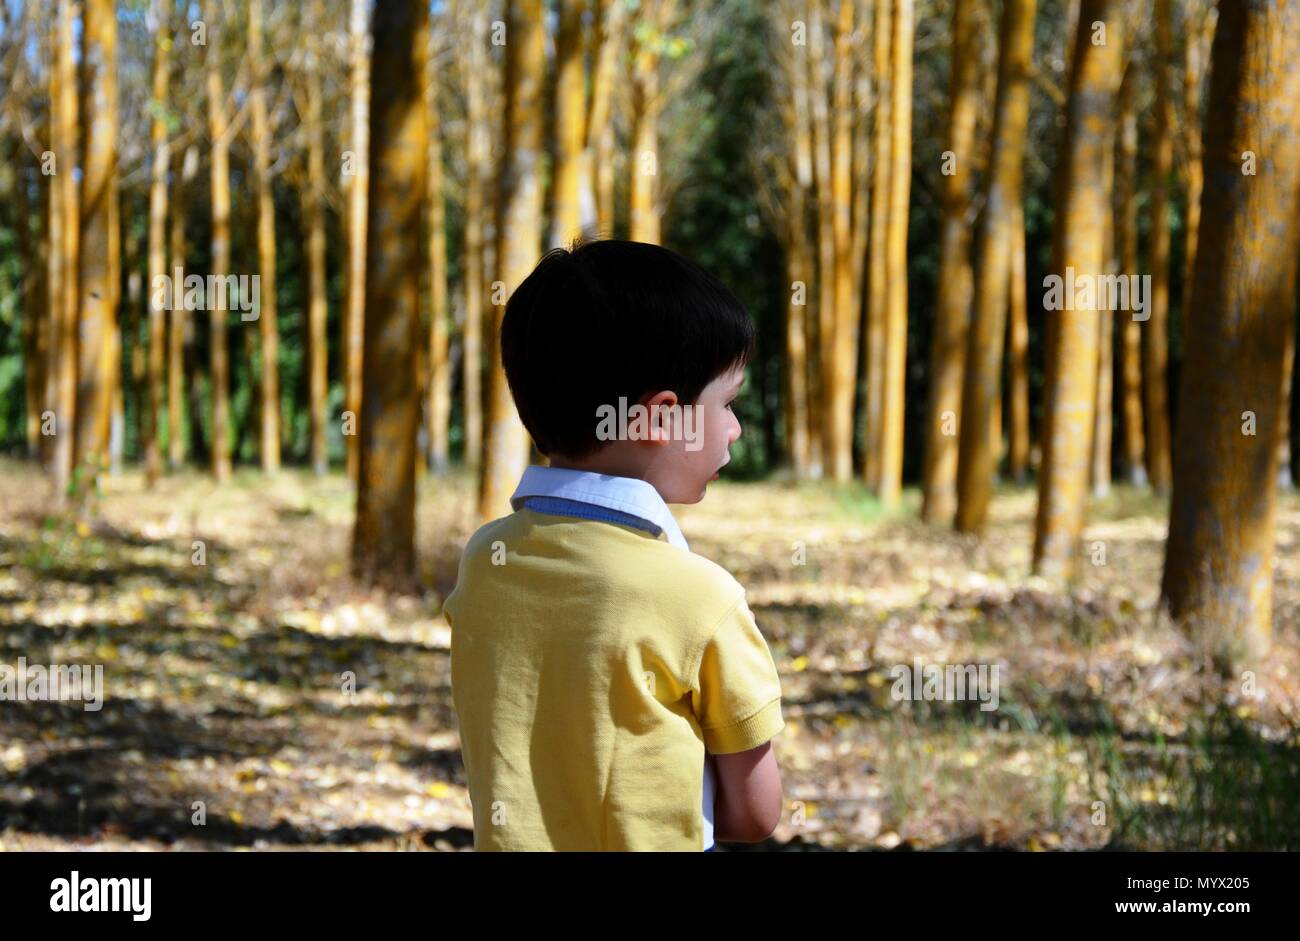 yellow forest with yellow trees, the end of the forest, Stock Photo